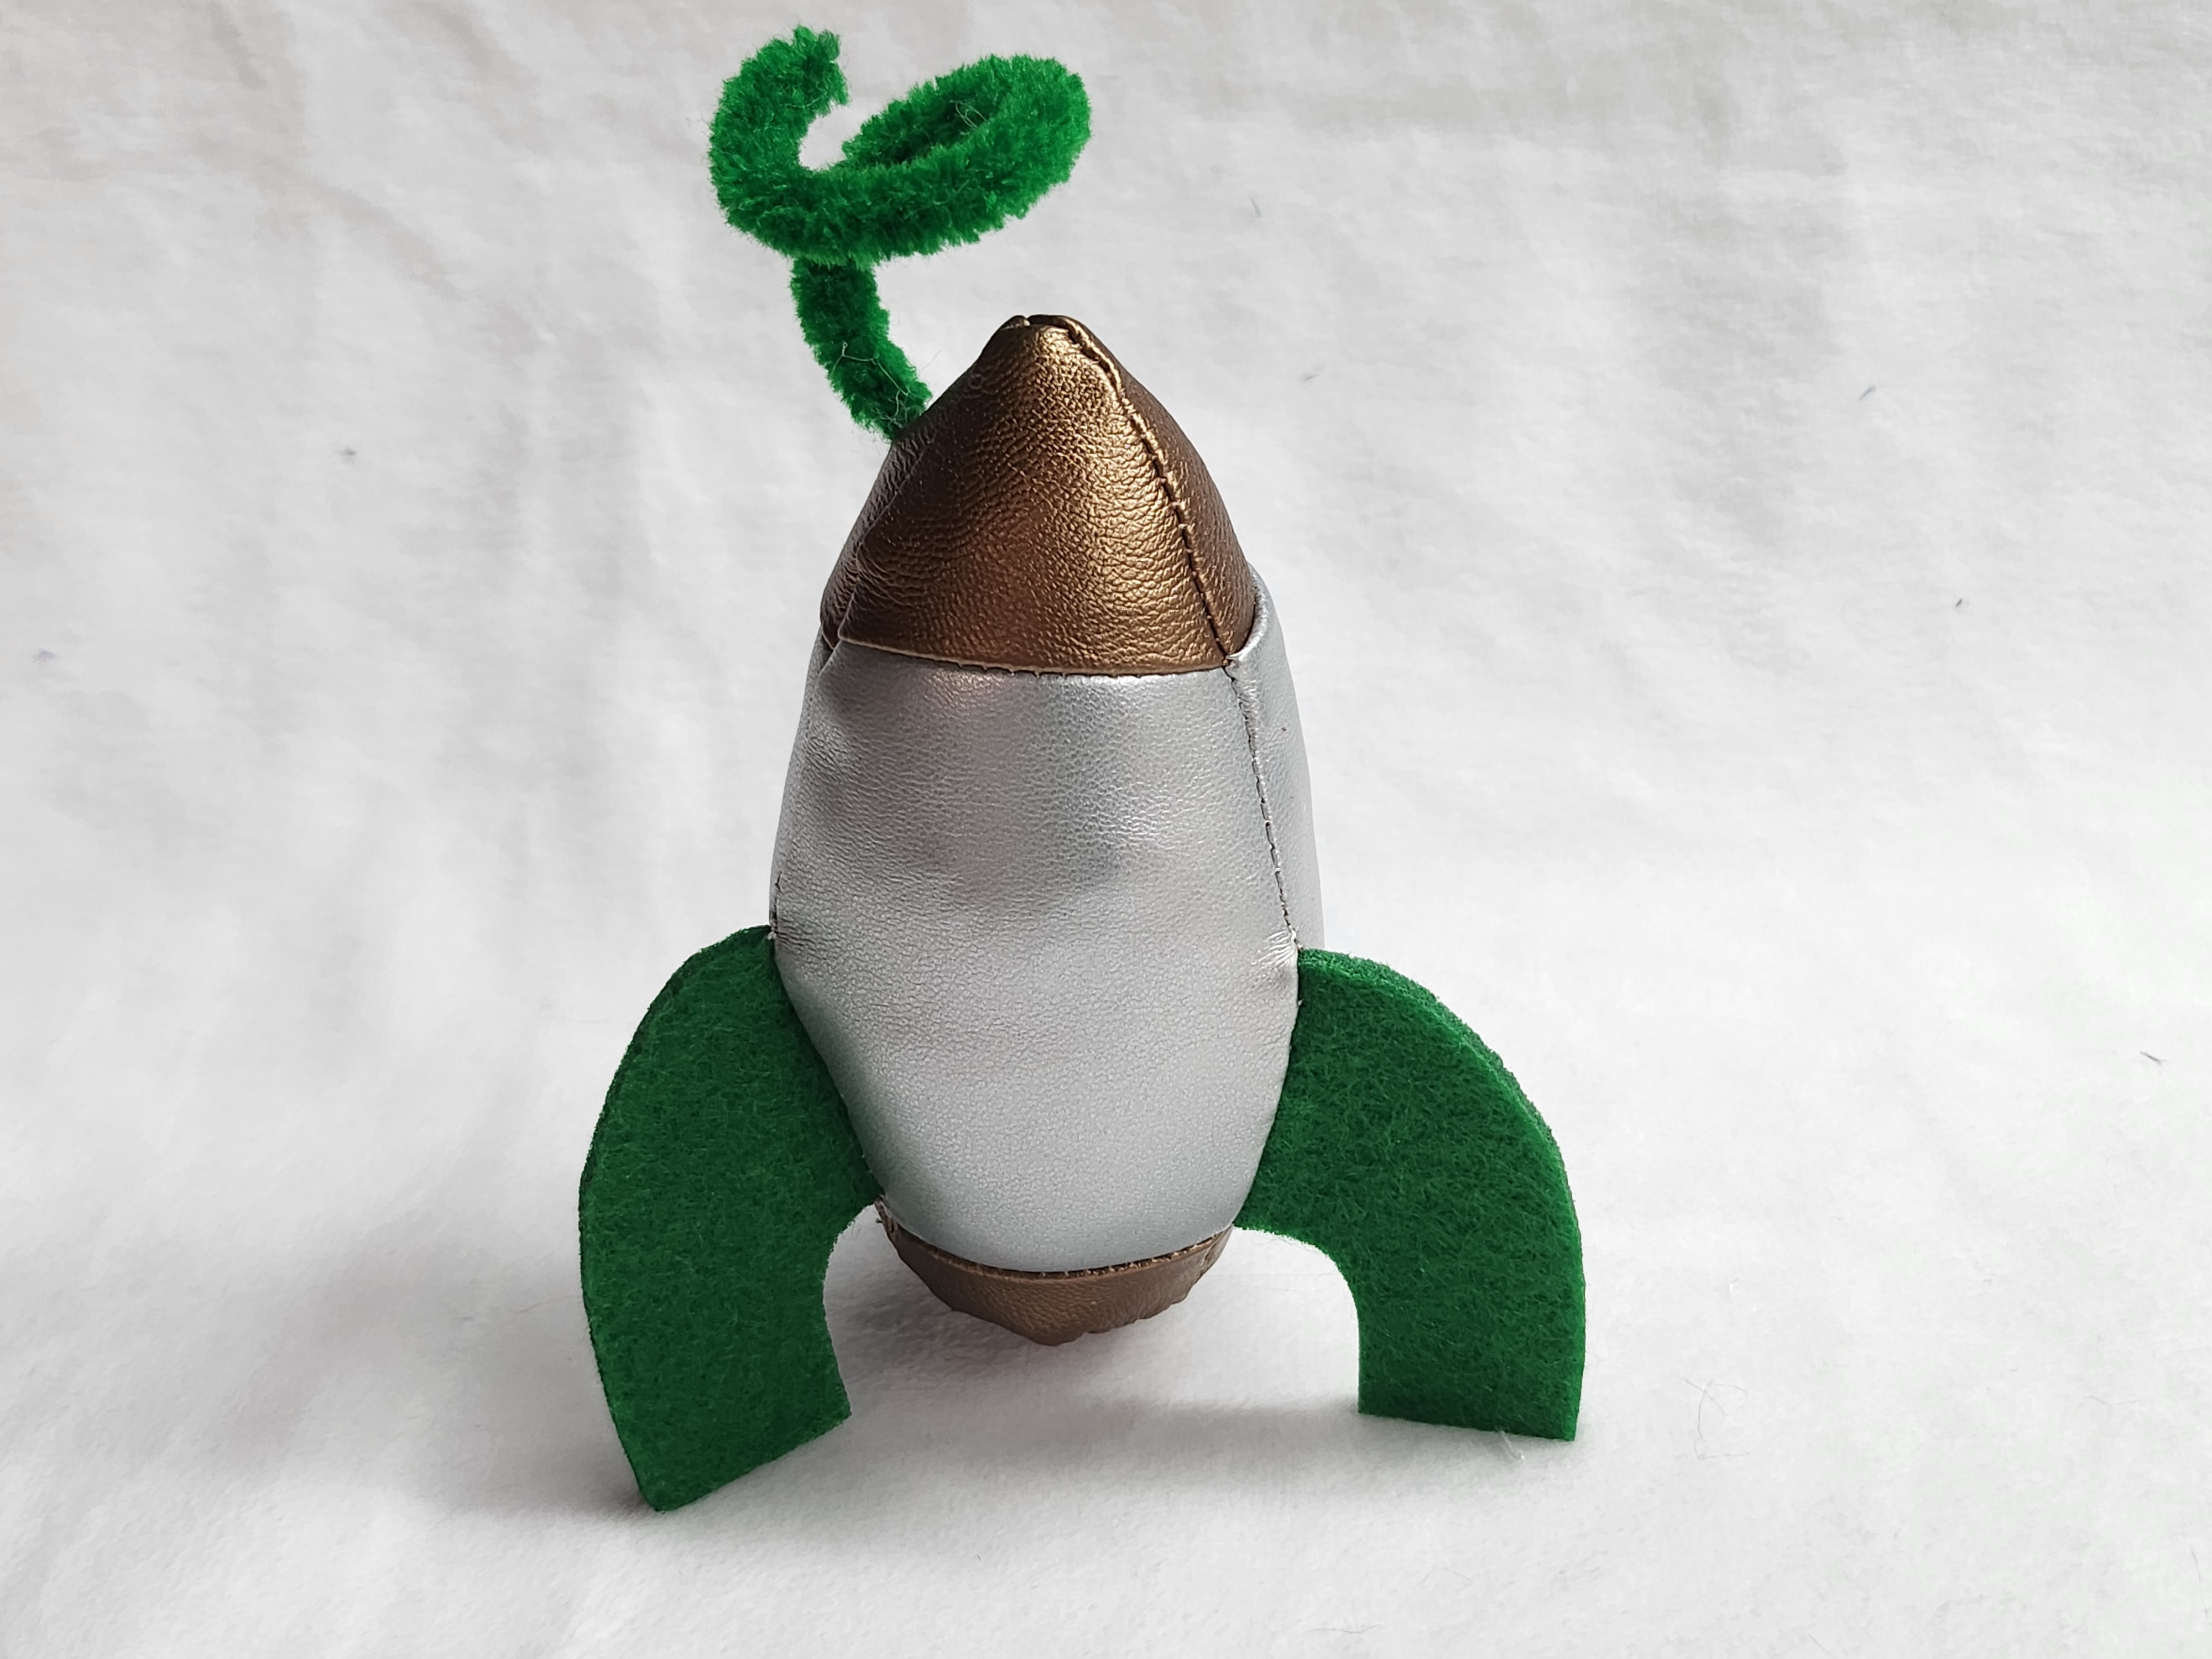 A small silver rocket with copper nosecone and tail, green fins, and a fuzzy green antenna.